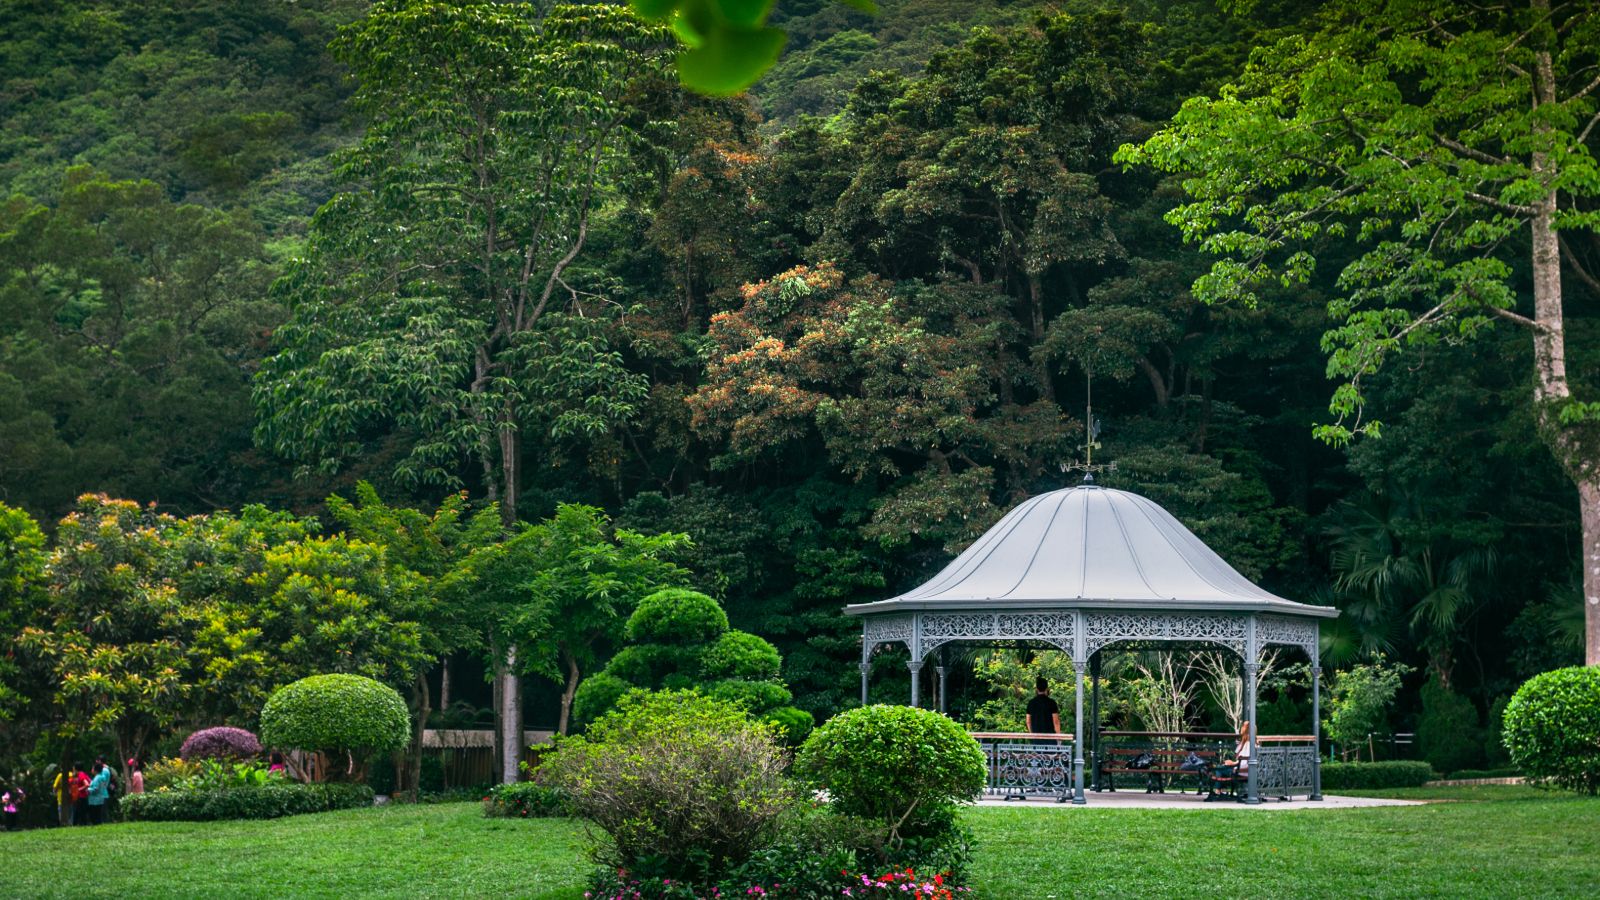 A pavilion nestled in Victoria Peak Garden, offering a tranquil retreat amidst lush greenery and breathtaking views of Hong Kong's skyline and Victoria Harbour.